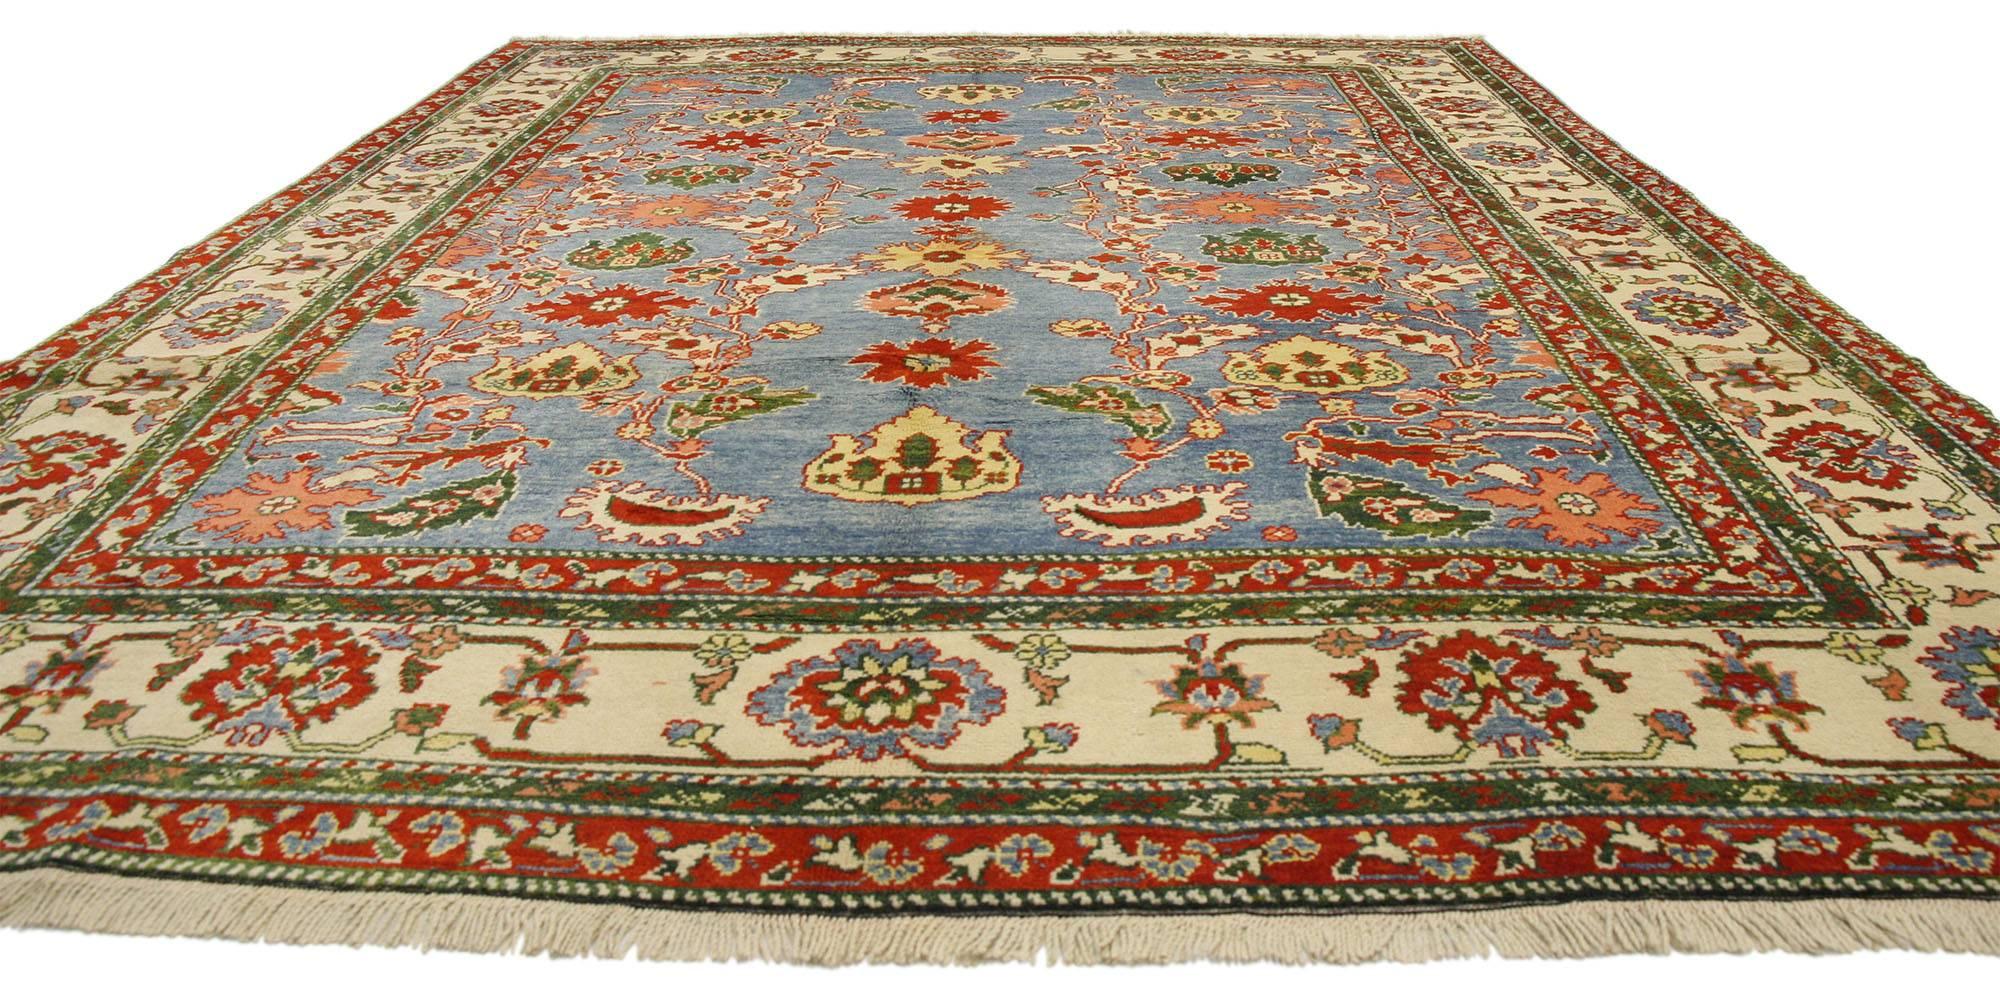 77134, vintage Turkish Oushak rug. This hand-knotted wool vintage Turkish Oushak rug features an allover geometric pattern surrounded by a classic border creating a well-balanced and timeless design. This vintage Oushak rug brings a subtle elegance